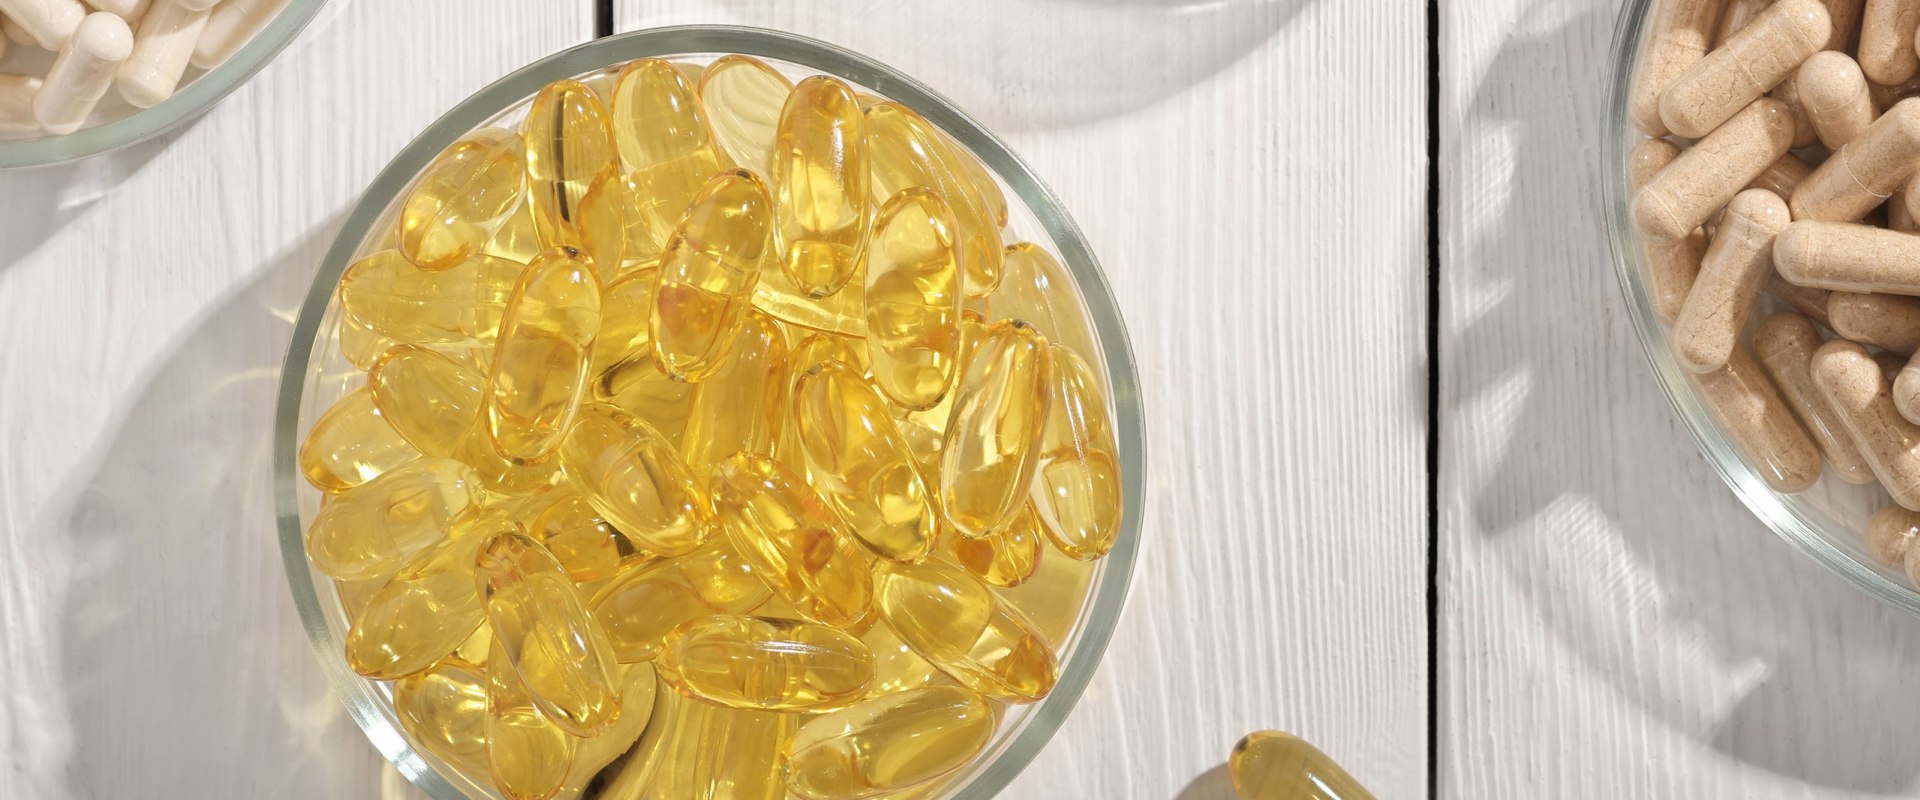 Does it really matter what brand of vitamins you buy?